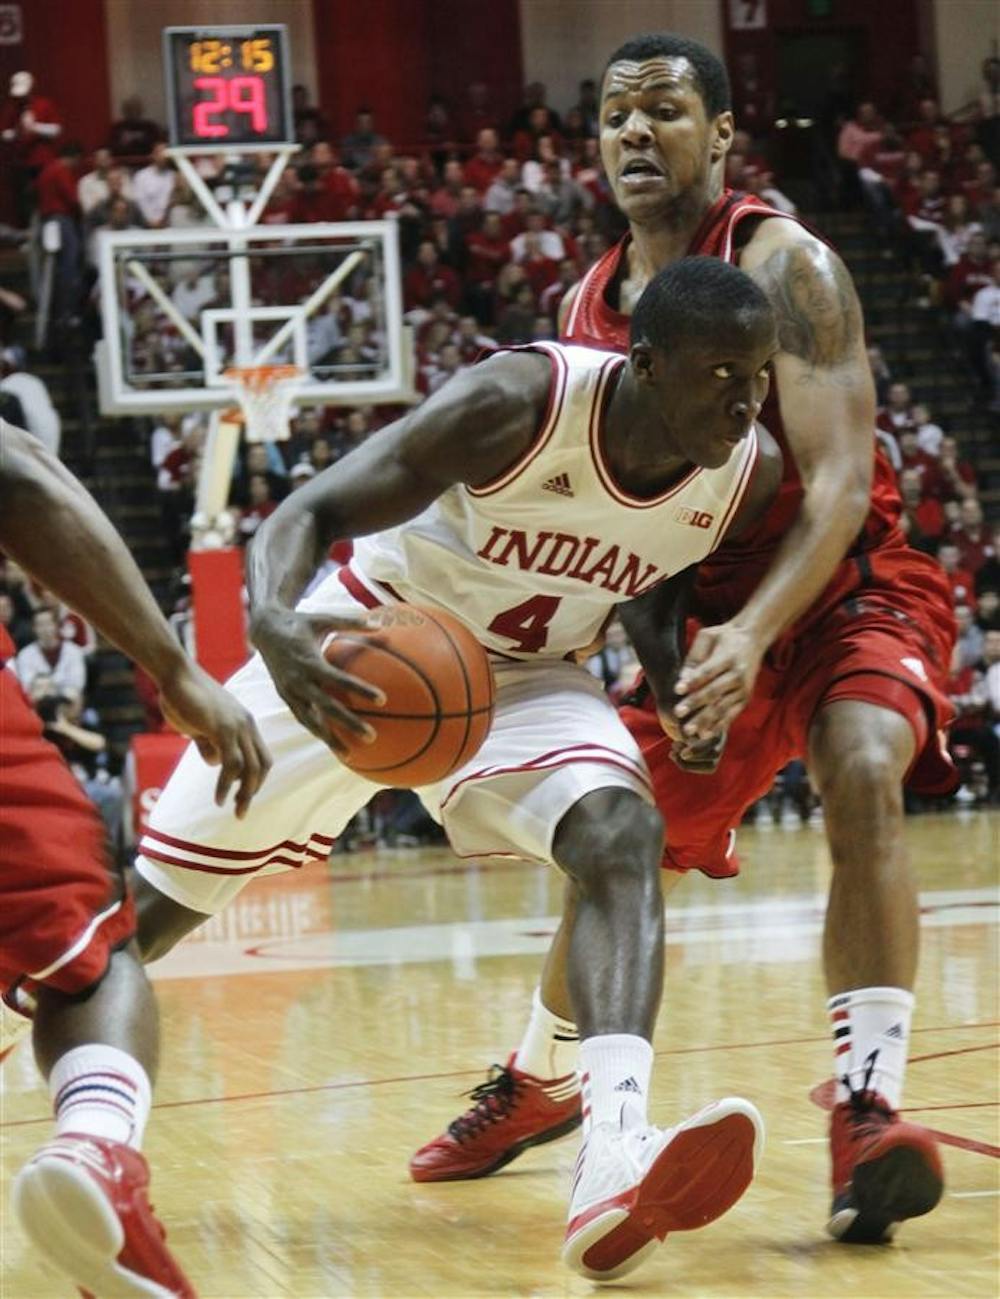 Junior guard Victor Oladipo dribbles around an opponent in the Hoosiers' 76-47 win against Nebraska on Wednesday at Assembly Hall.